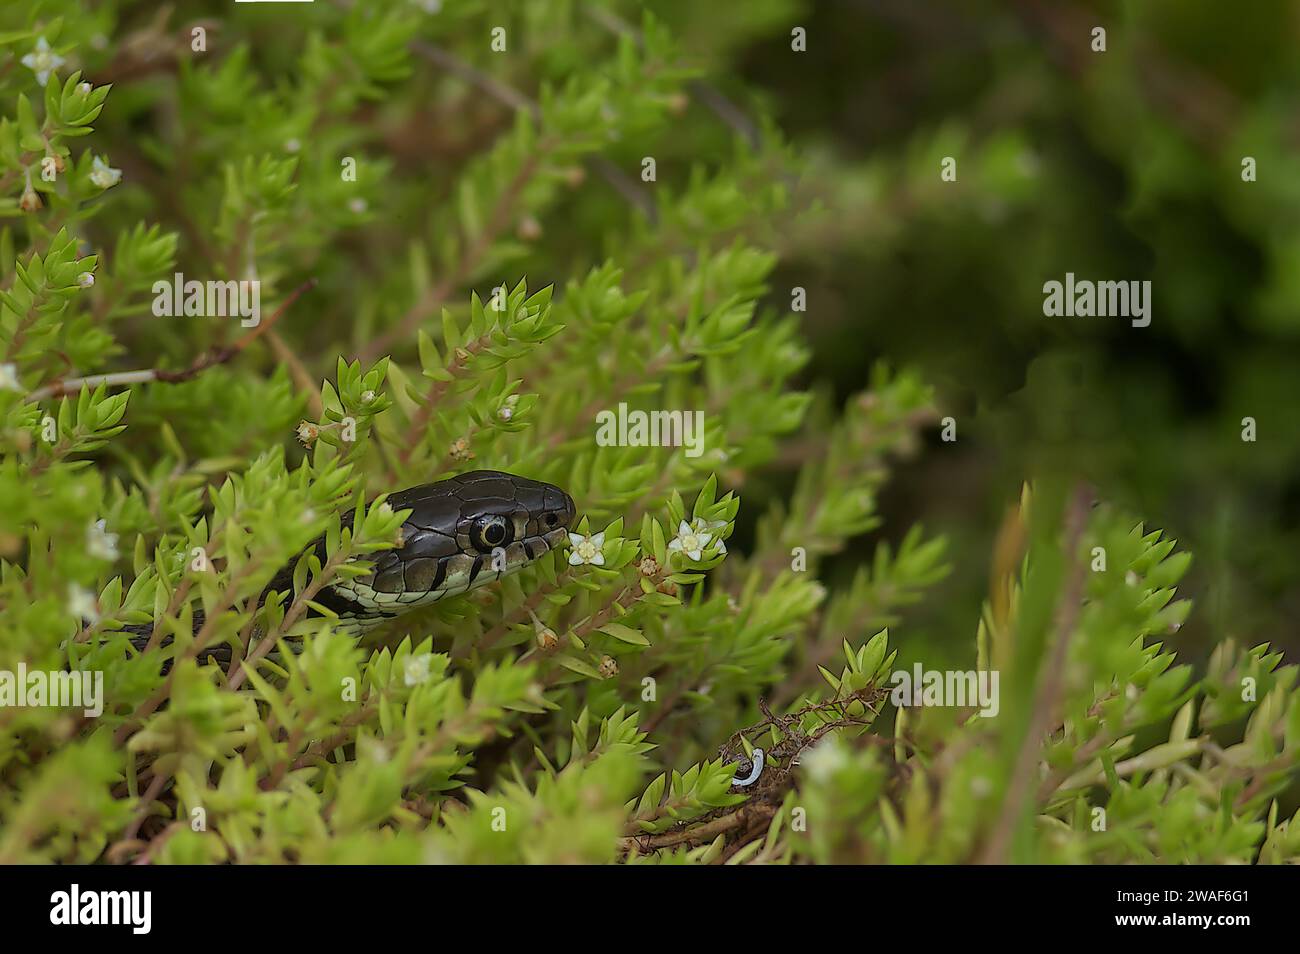 A grass snake perched atop a lush green plant, adorned with many leaves Stock Photo